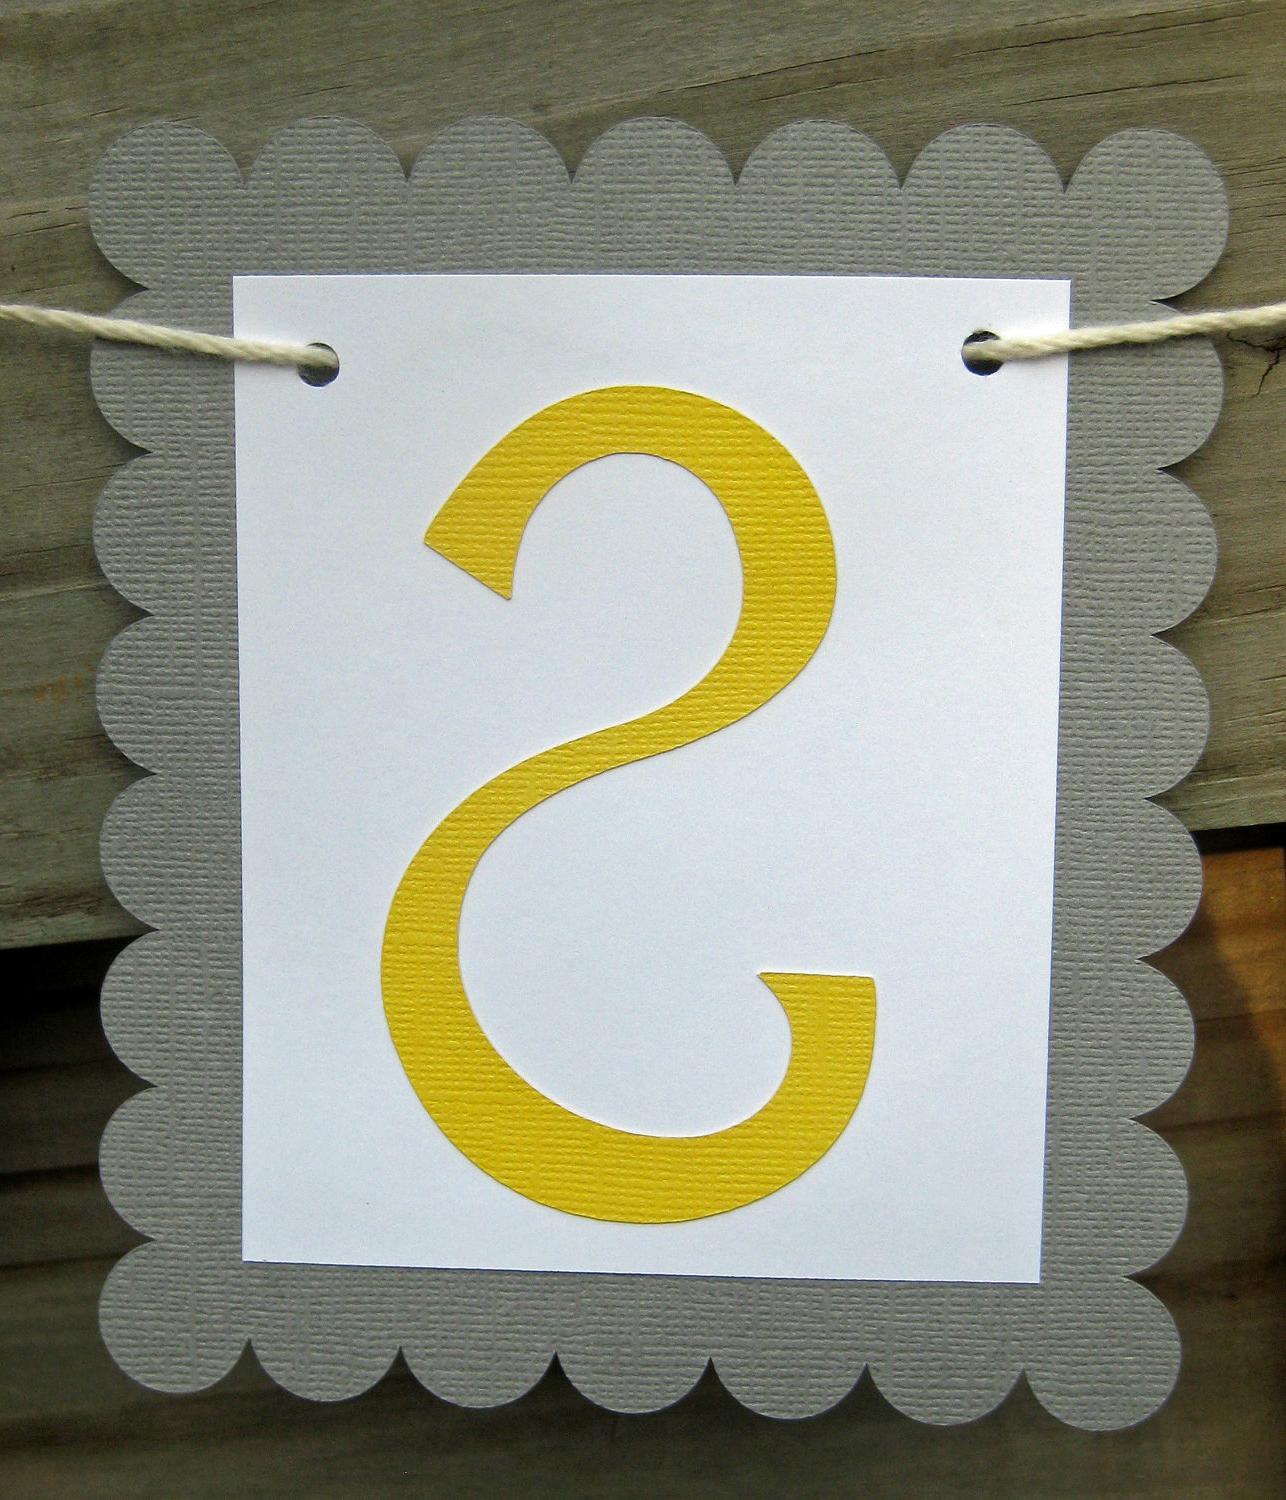 Just Married Banner - Grey and Yellow. From craftyearth